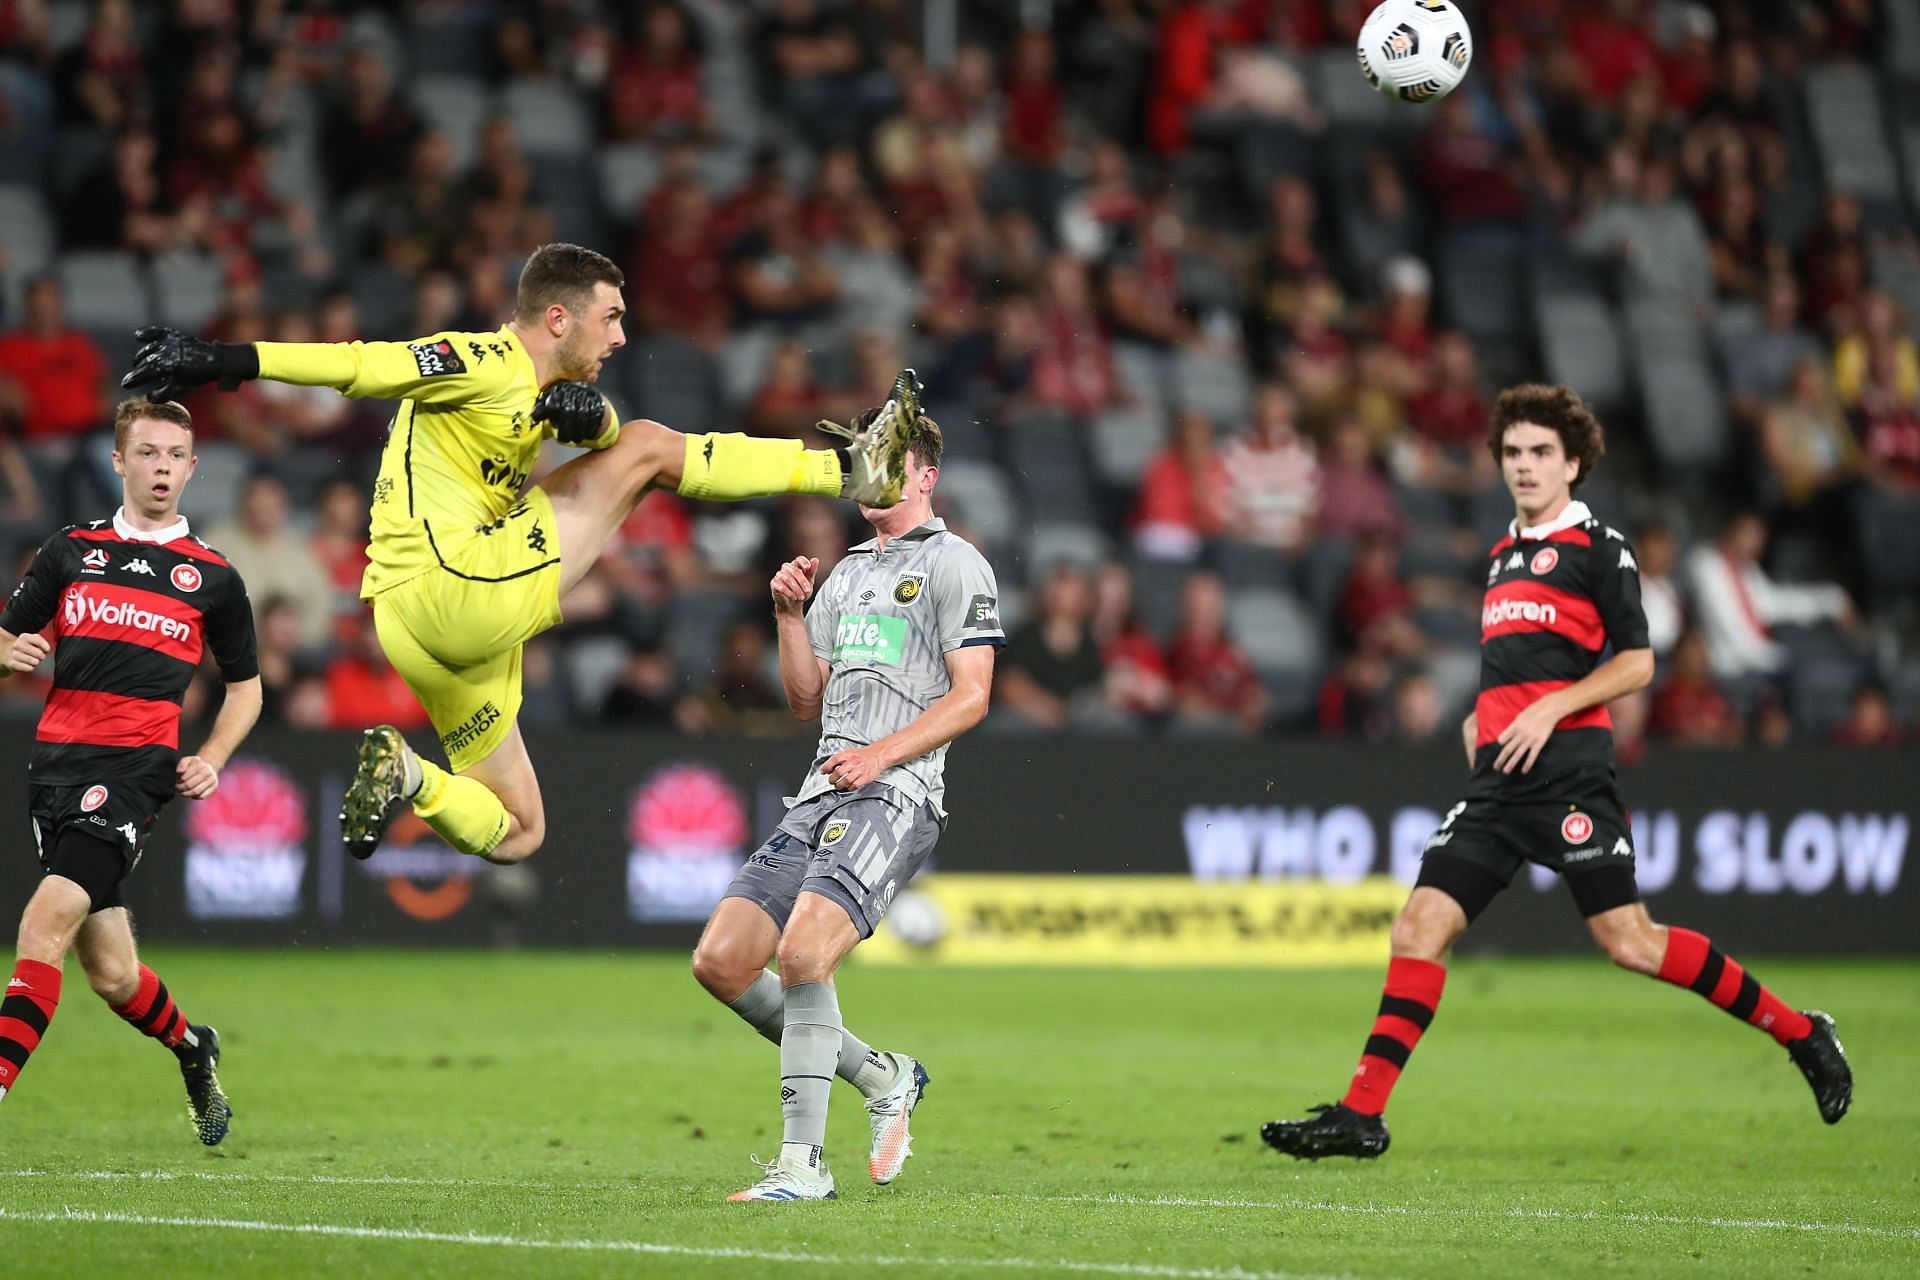 Western Sydney Wanderers need to win this game